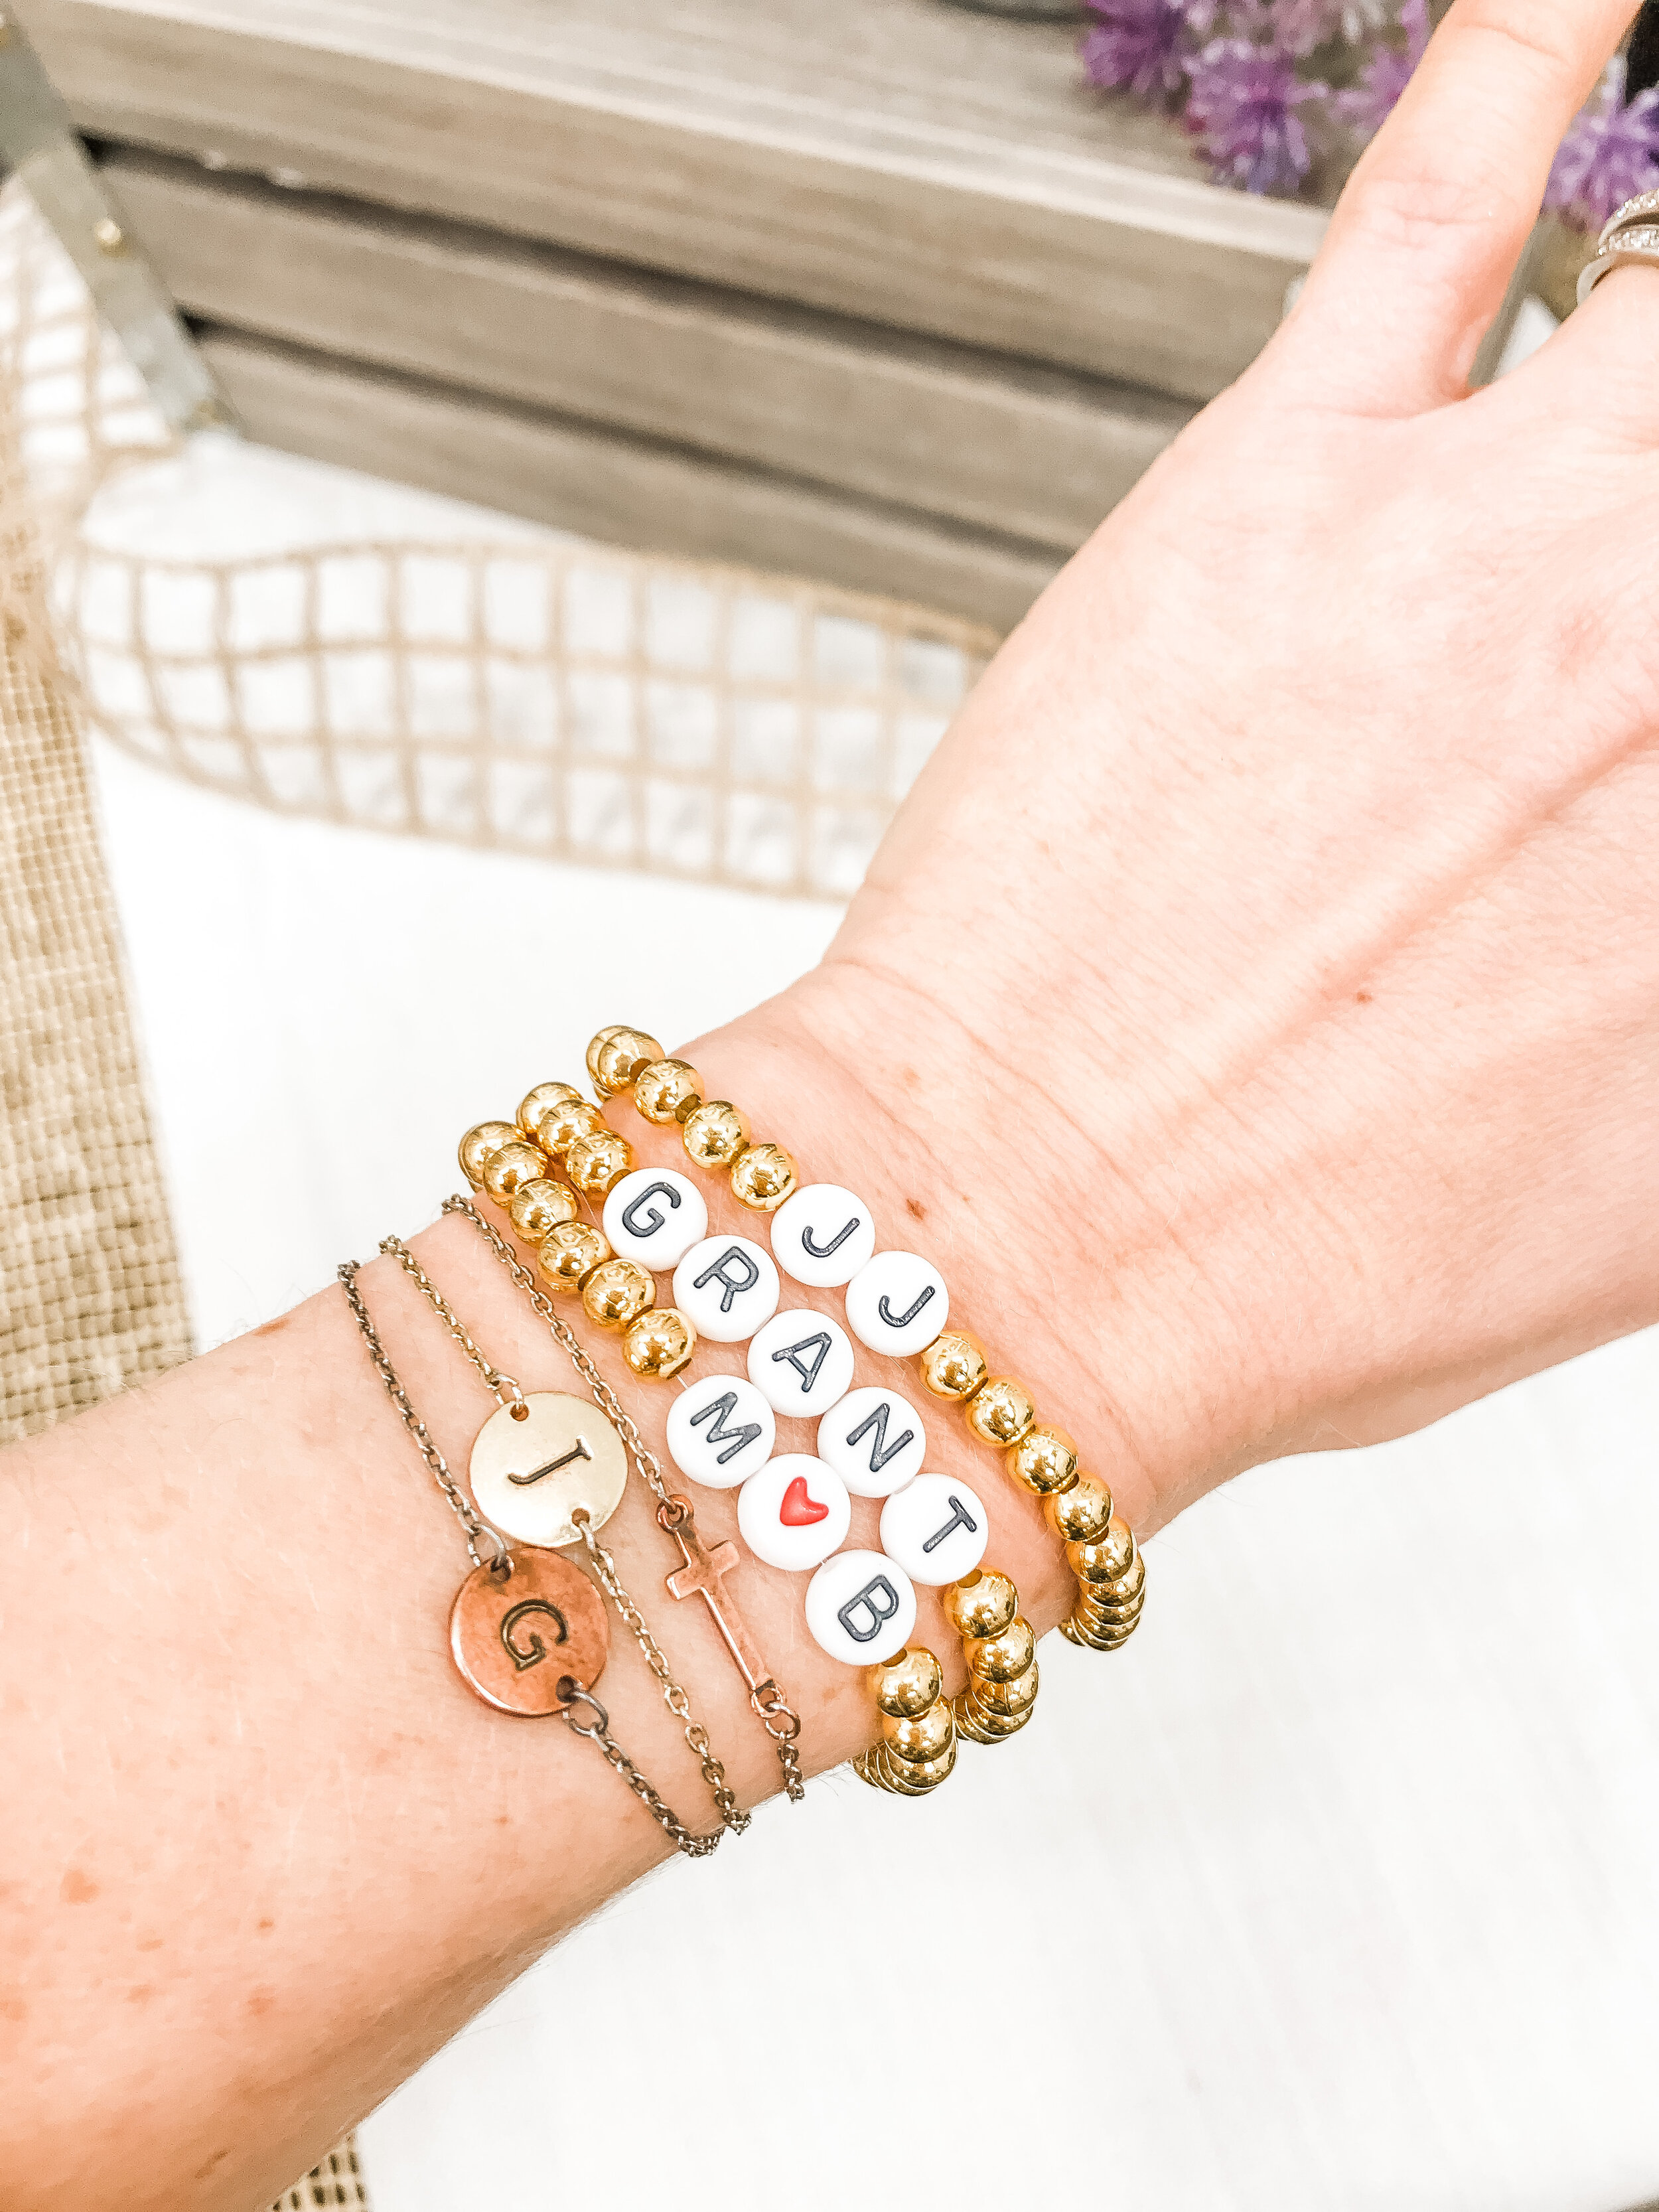 DIY Letter Bracelets — From Scratch with Maria Provenzano